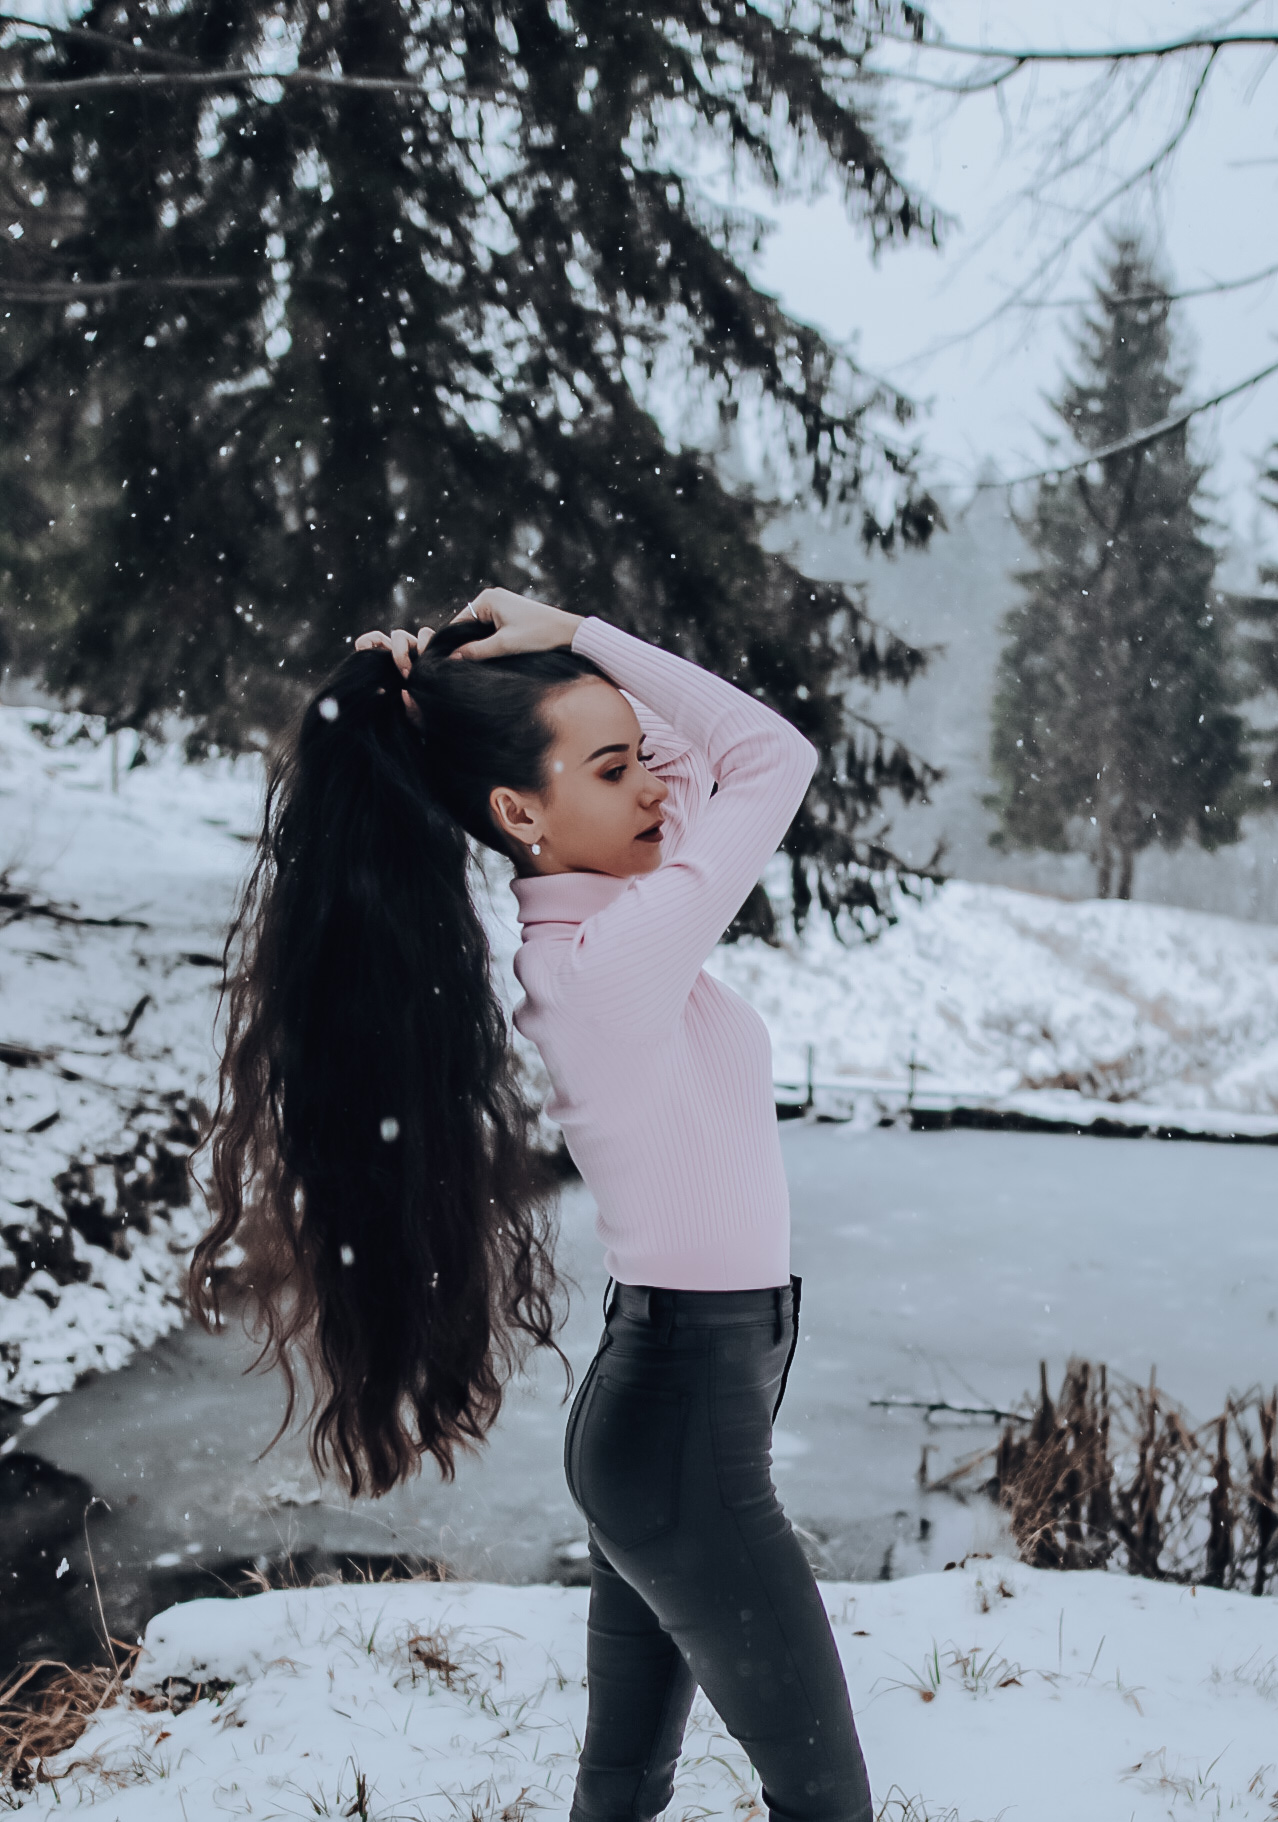 How To Protect Hair And Scalp In Winter